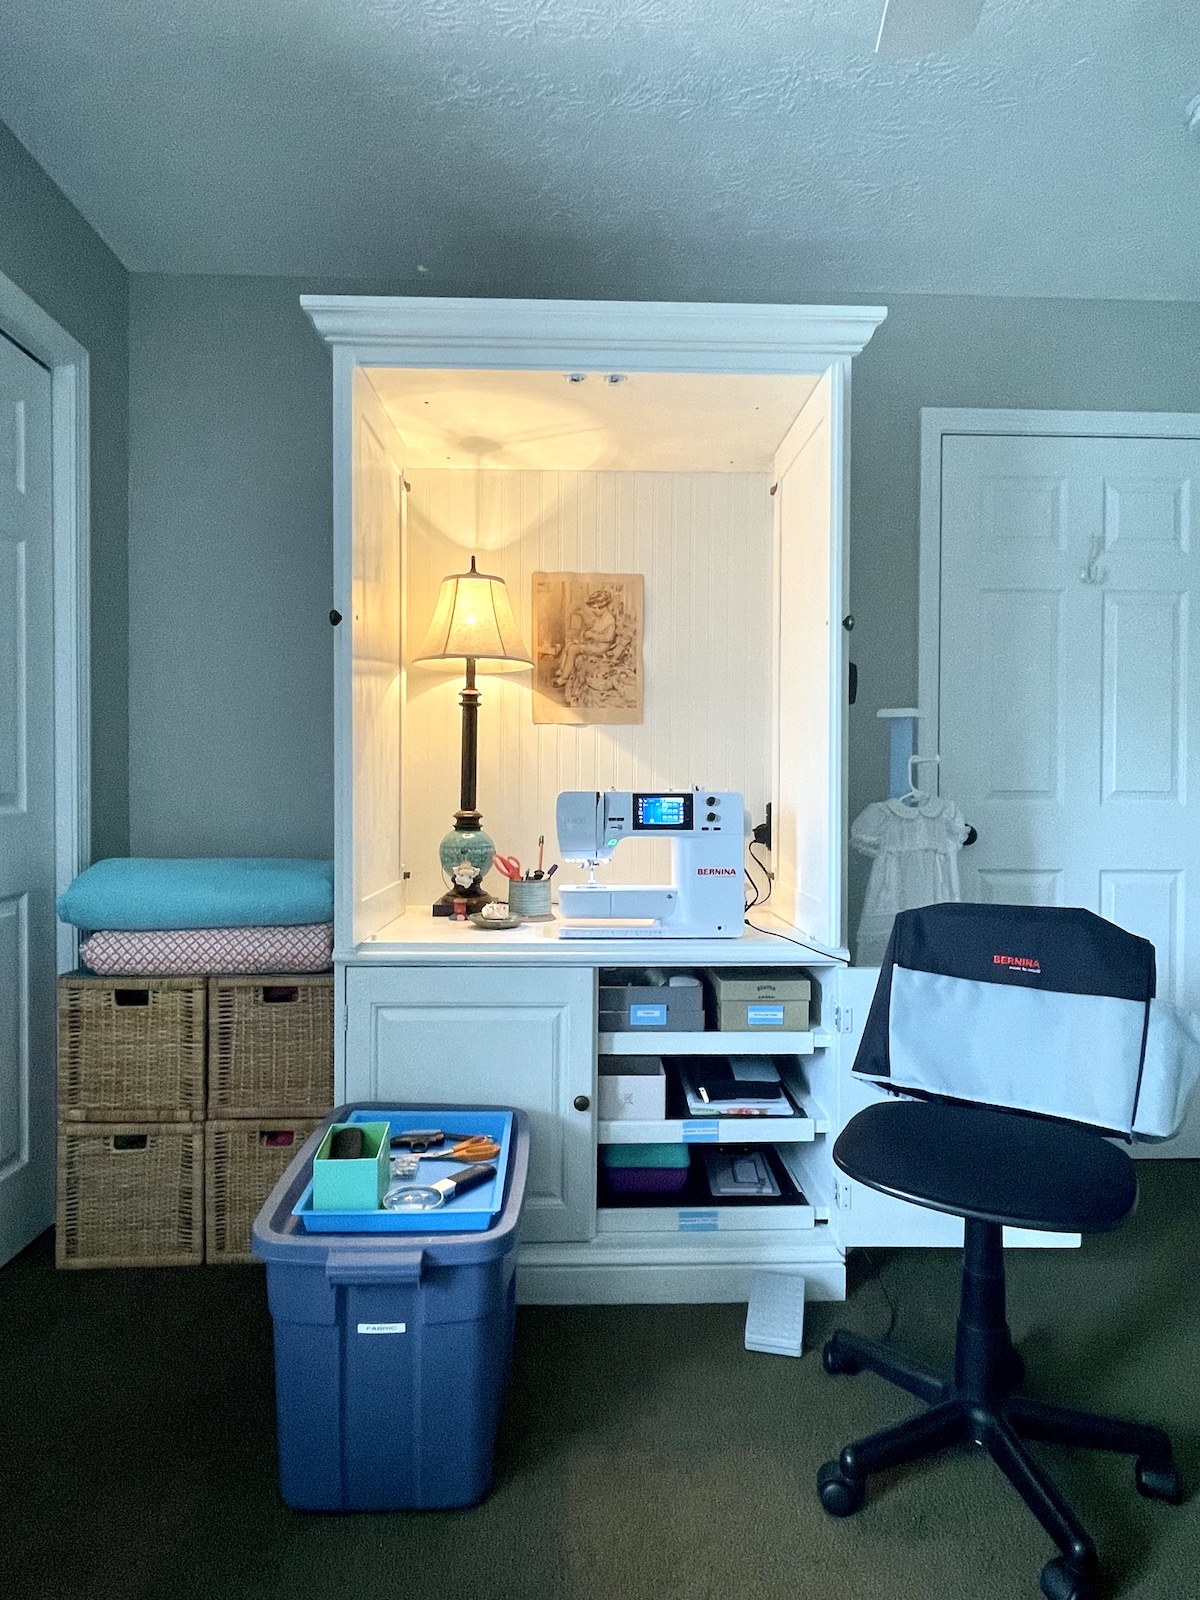 Sewing Space Tutorial: Transformation Guest Room to Sewing Room 2